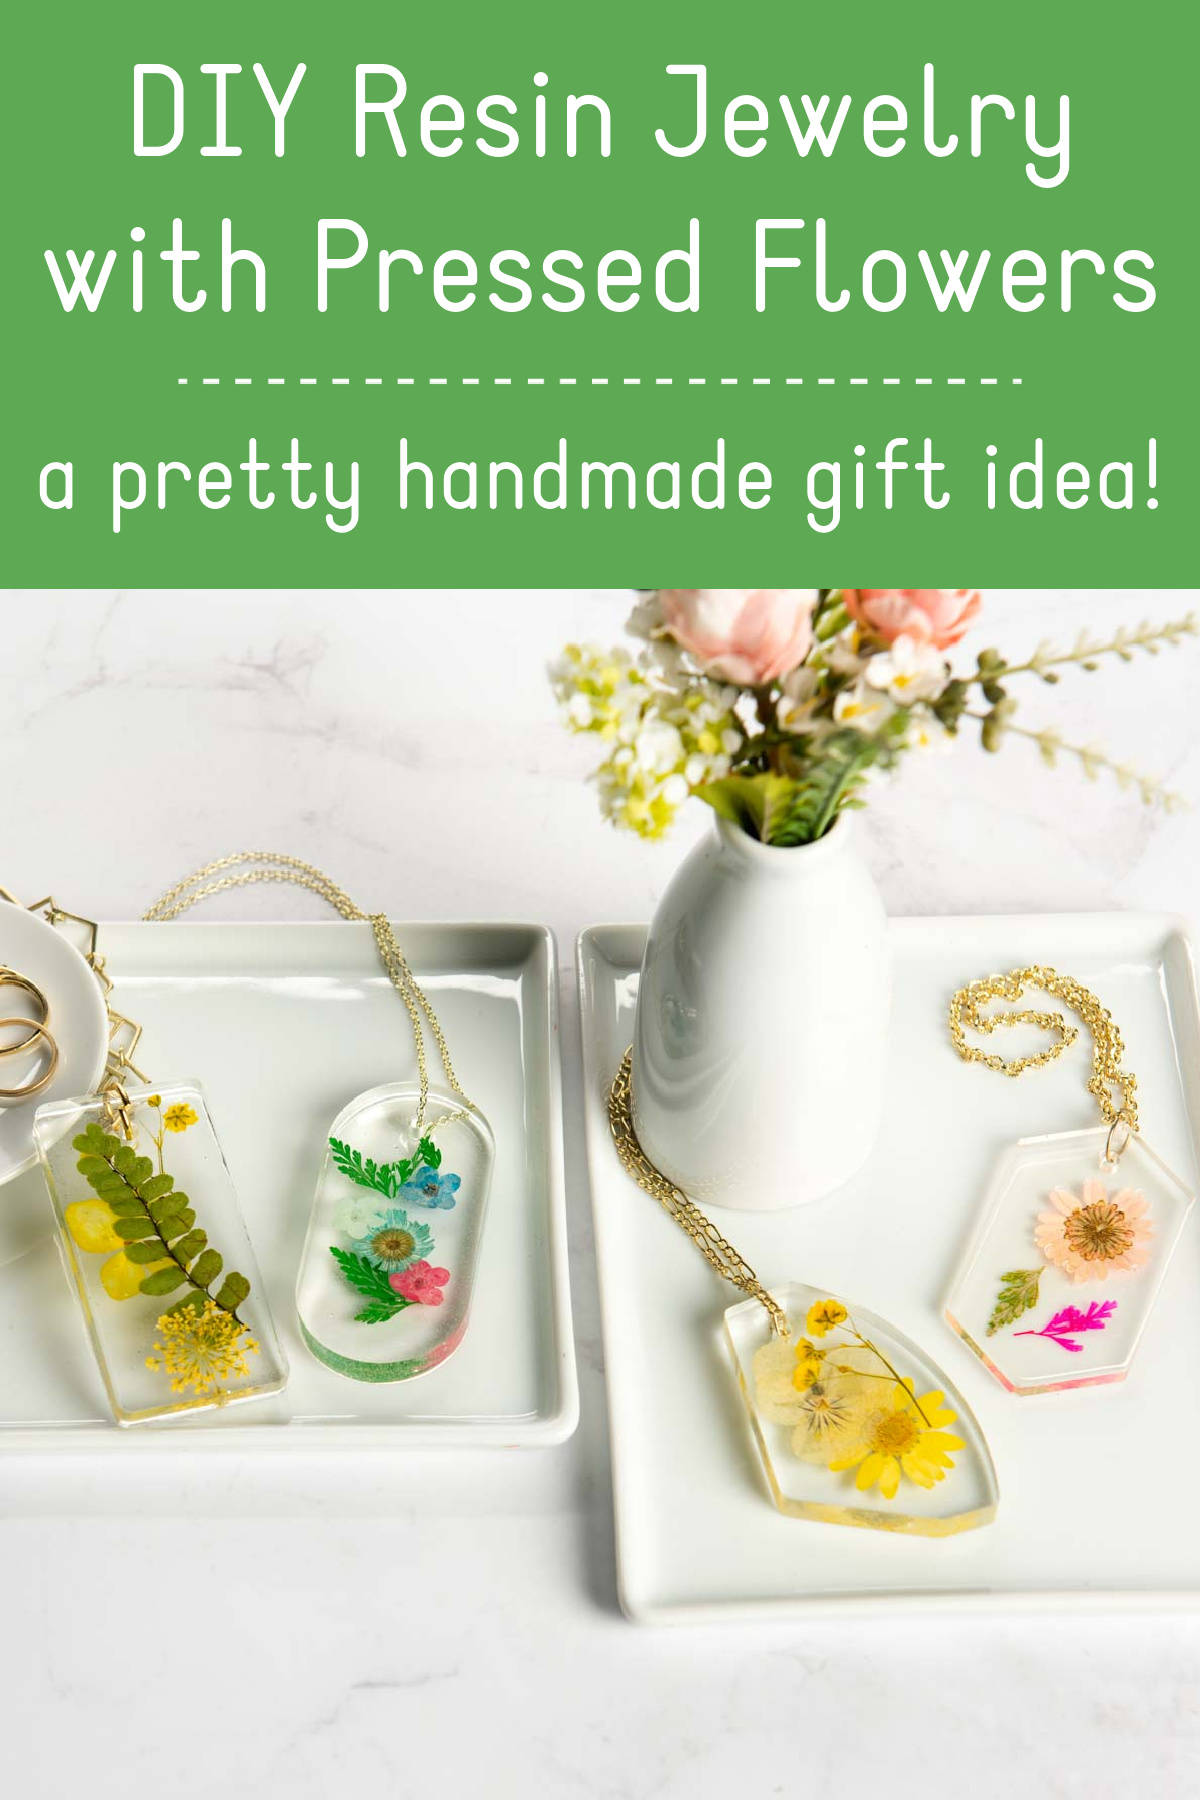 DIY resin jewelry with pressed flowers